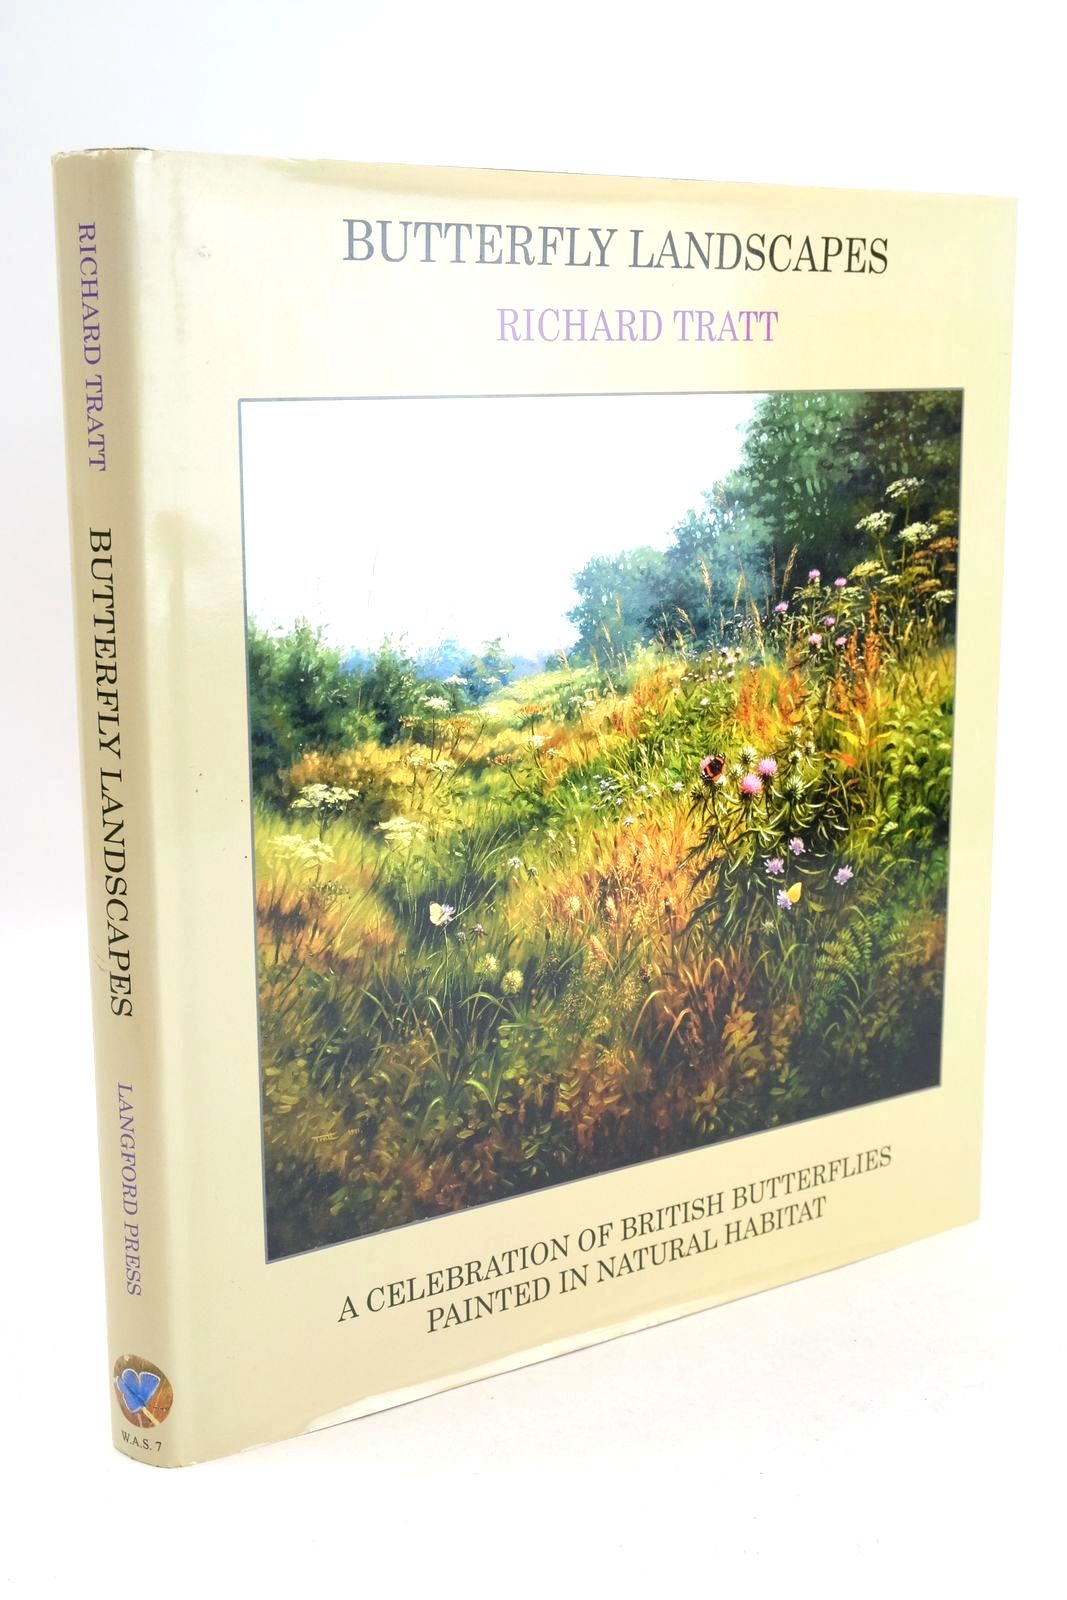 Photo of BUTTERFLY LANDSCAPES: A CELEBRATON OF BRITISH BUTTERFLIES PAINTED IN NATURAL HABITAT written by Tratt, Richard illustrated by Tratt, Richard published by Langford Press (STOCK CODE: 1325701)  for sale by Stella & Rose's Books